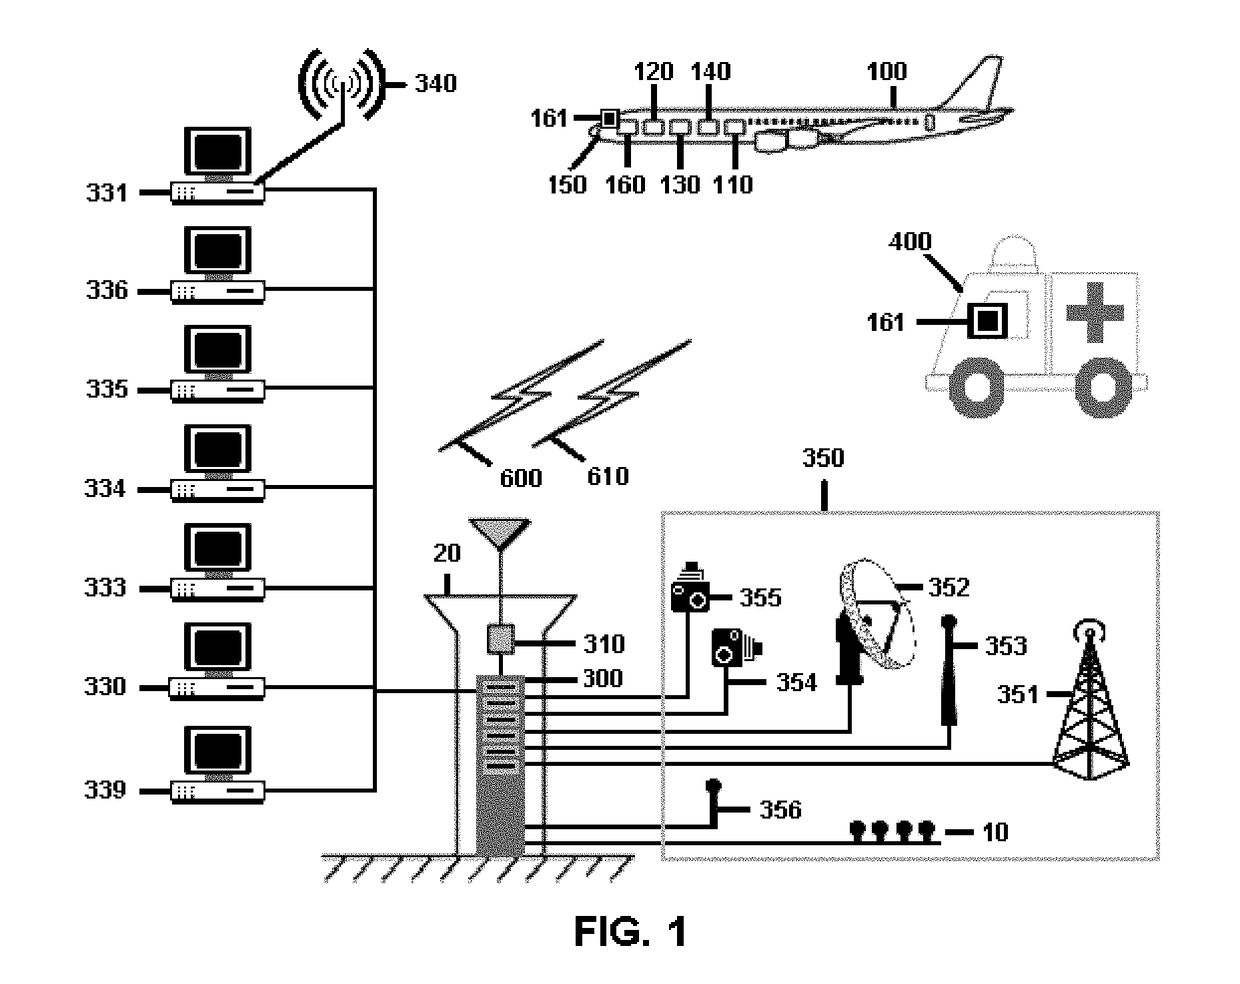 System and methods for automated airport air traffic control services